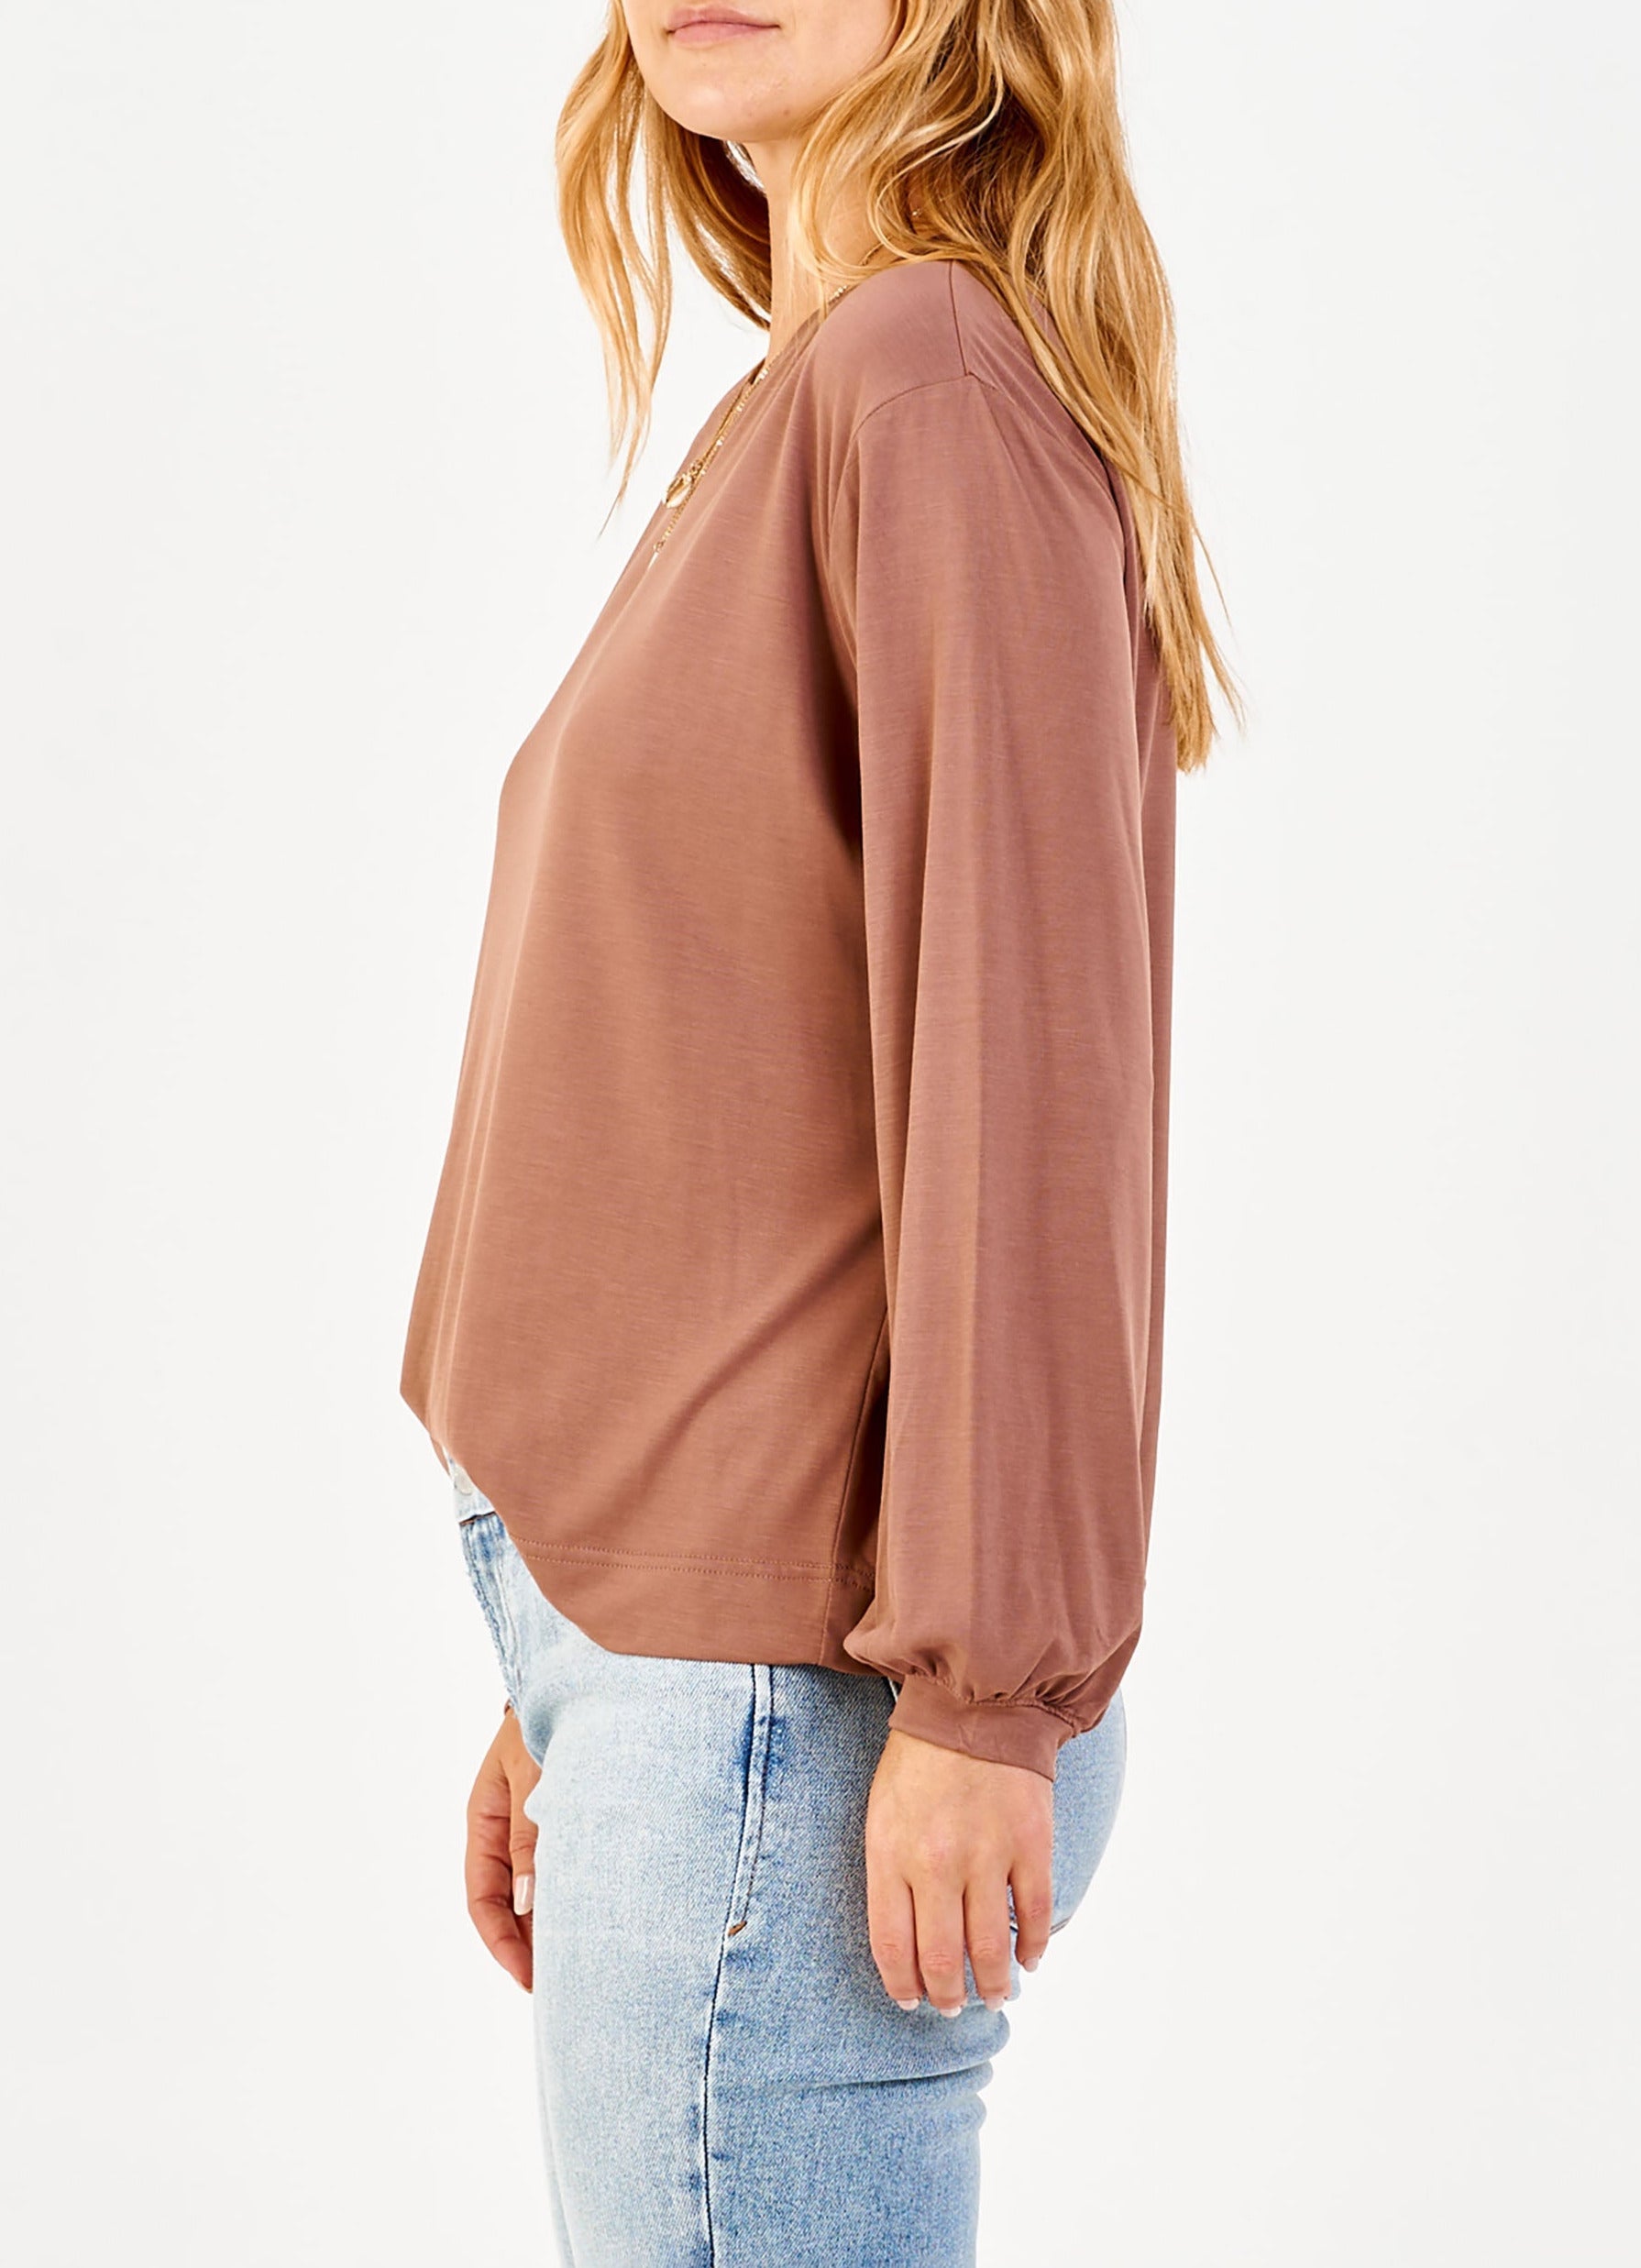 matilda-basic-long-sleeve-top-sable-side-image-another-love-clothing